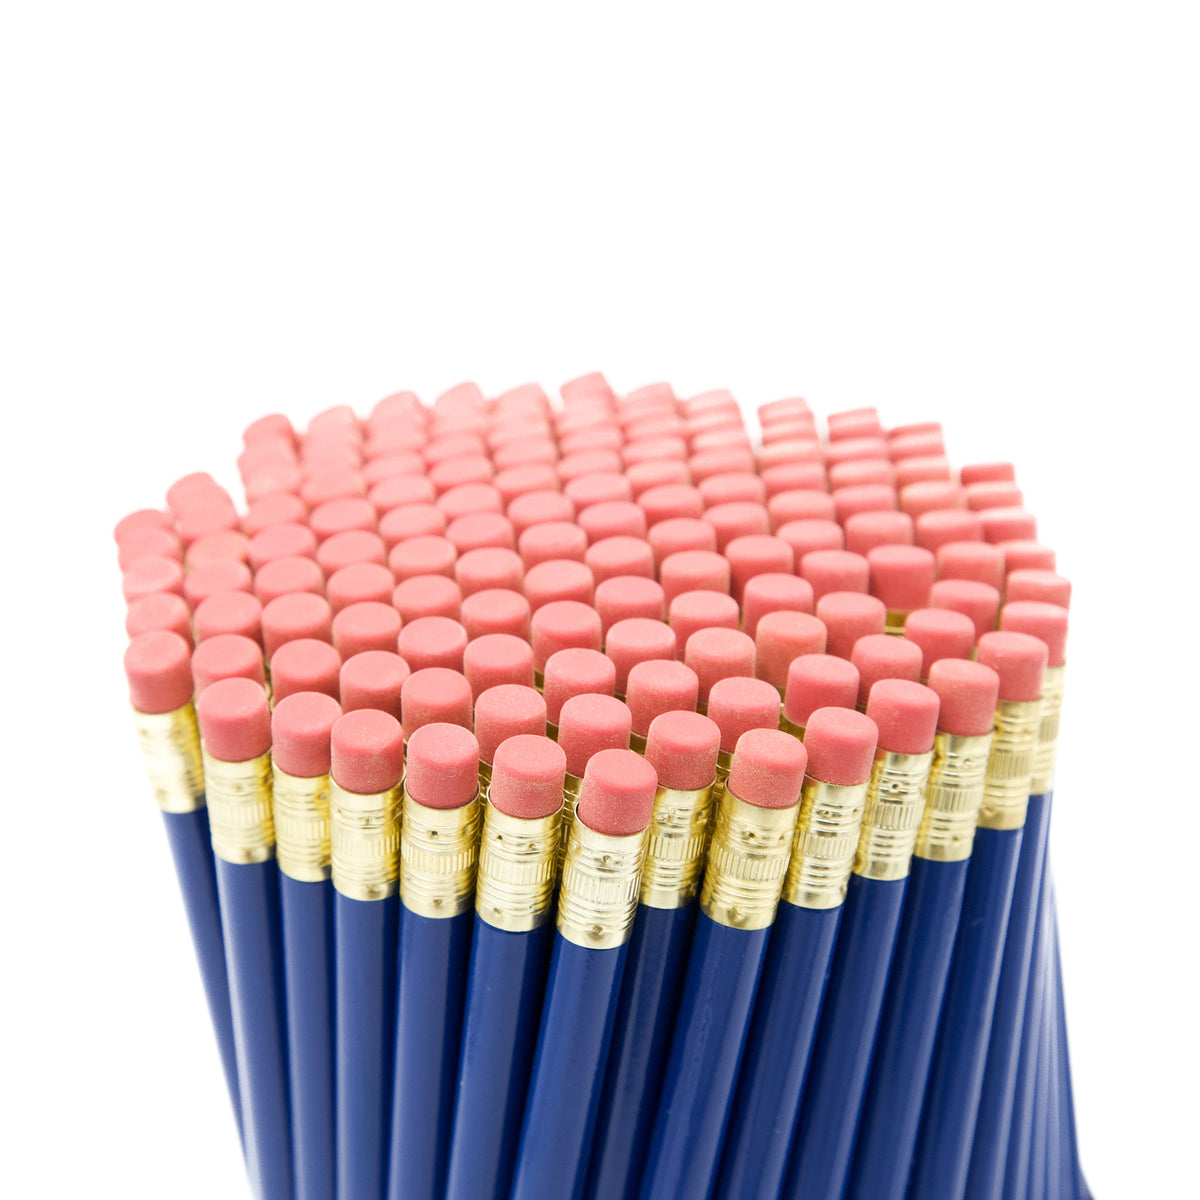 Musgrave Pencil MUSDCAPSA-2 Wedgecap Erasers Tub Assorted Color - Pack of 144